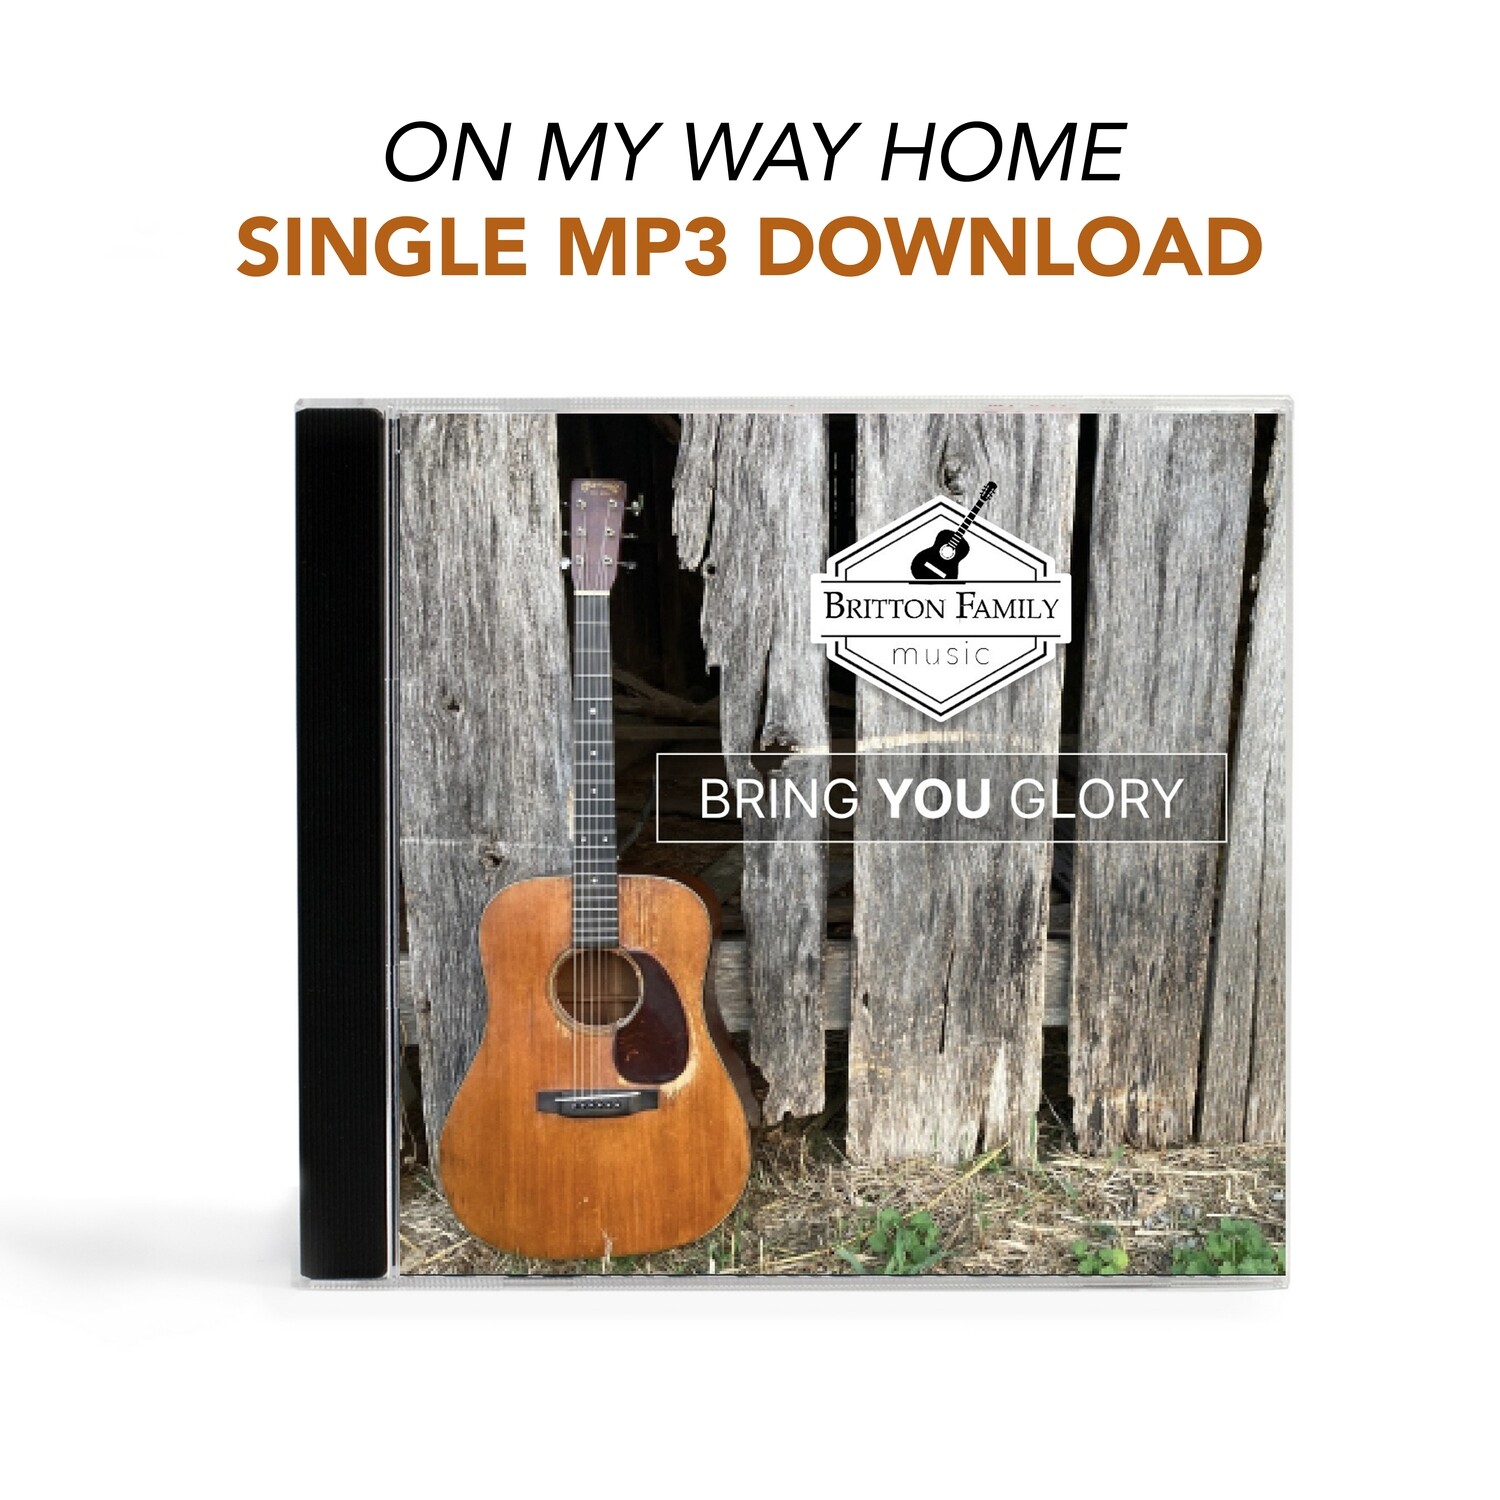 On My Way Home - Single MP3 Download